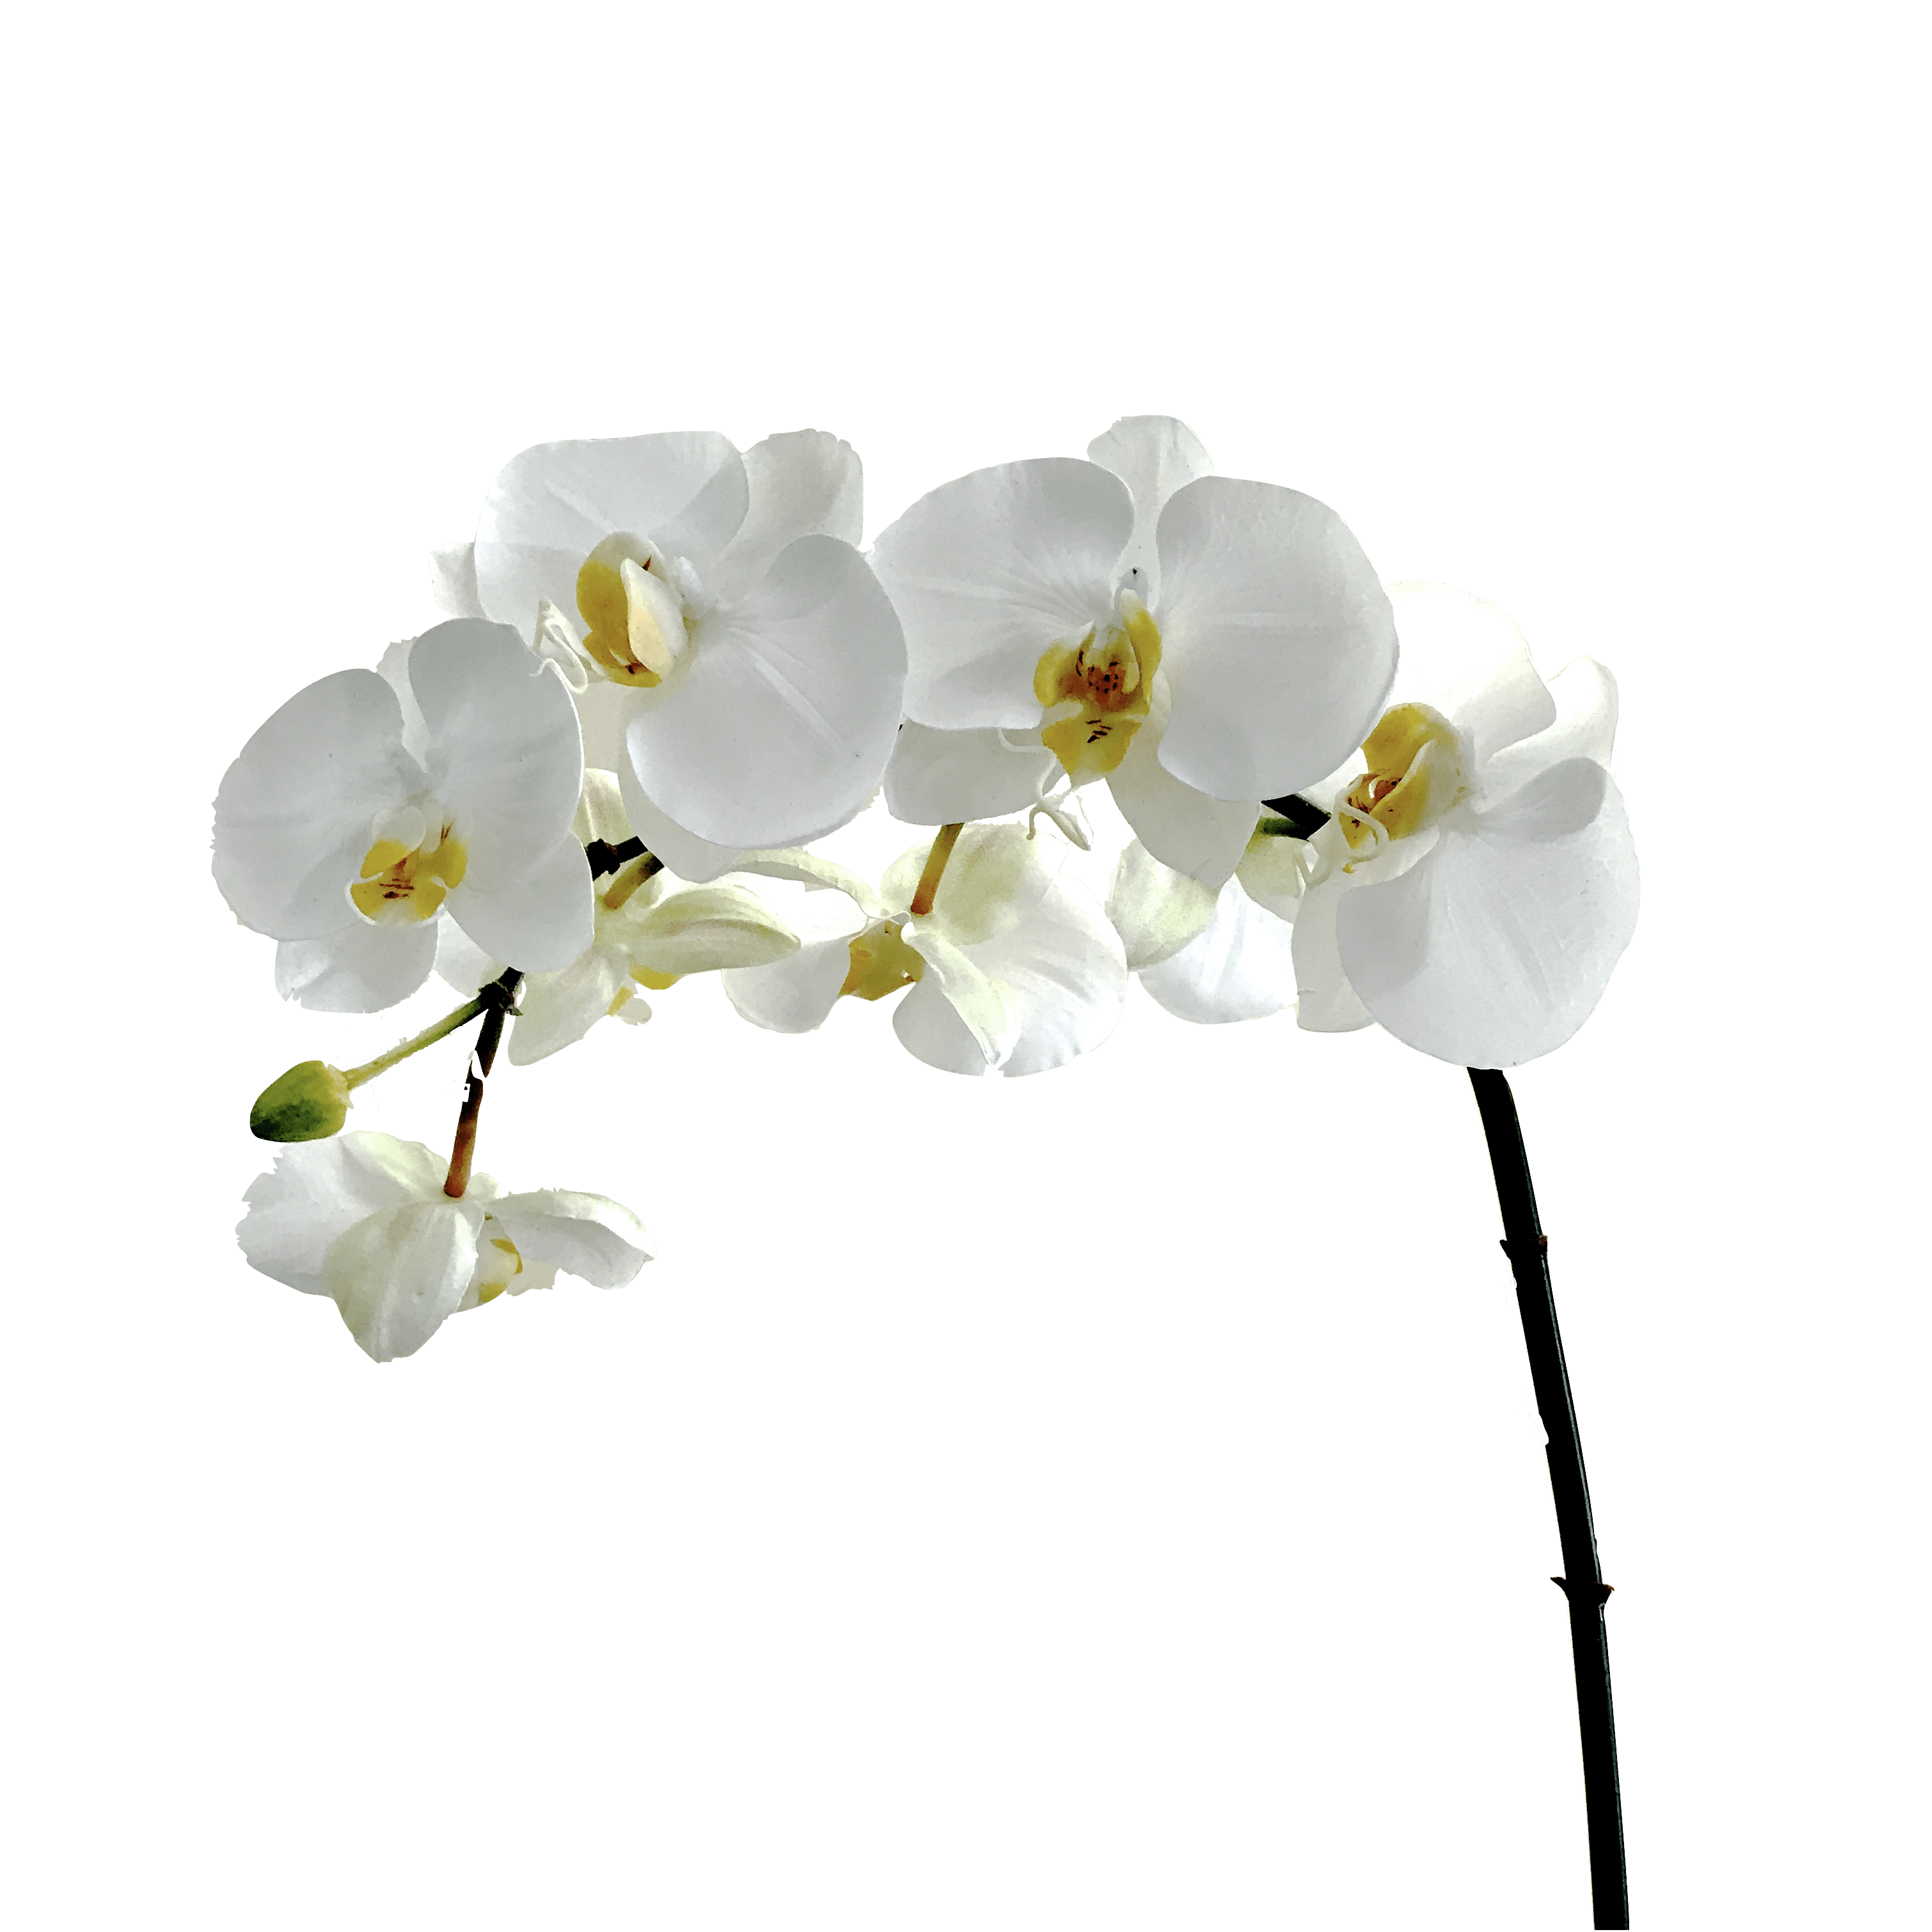 luxury artificial fake silk flowers white orcihd stem large flowers lifelike realistic faux flowers buy online from Amaranthine Blooms UK